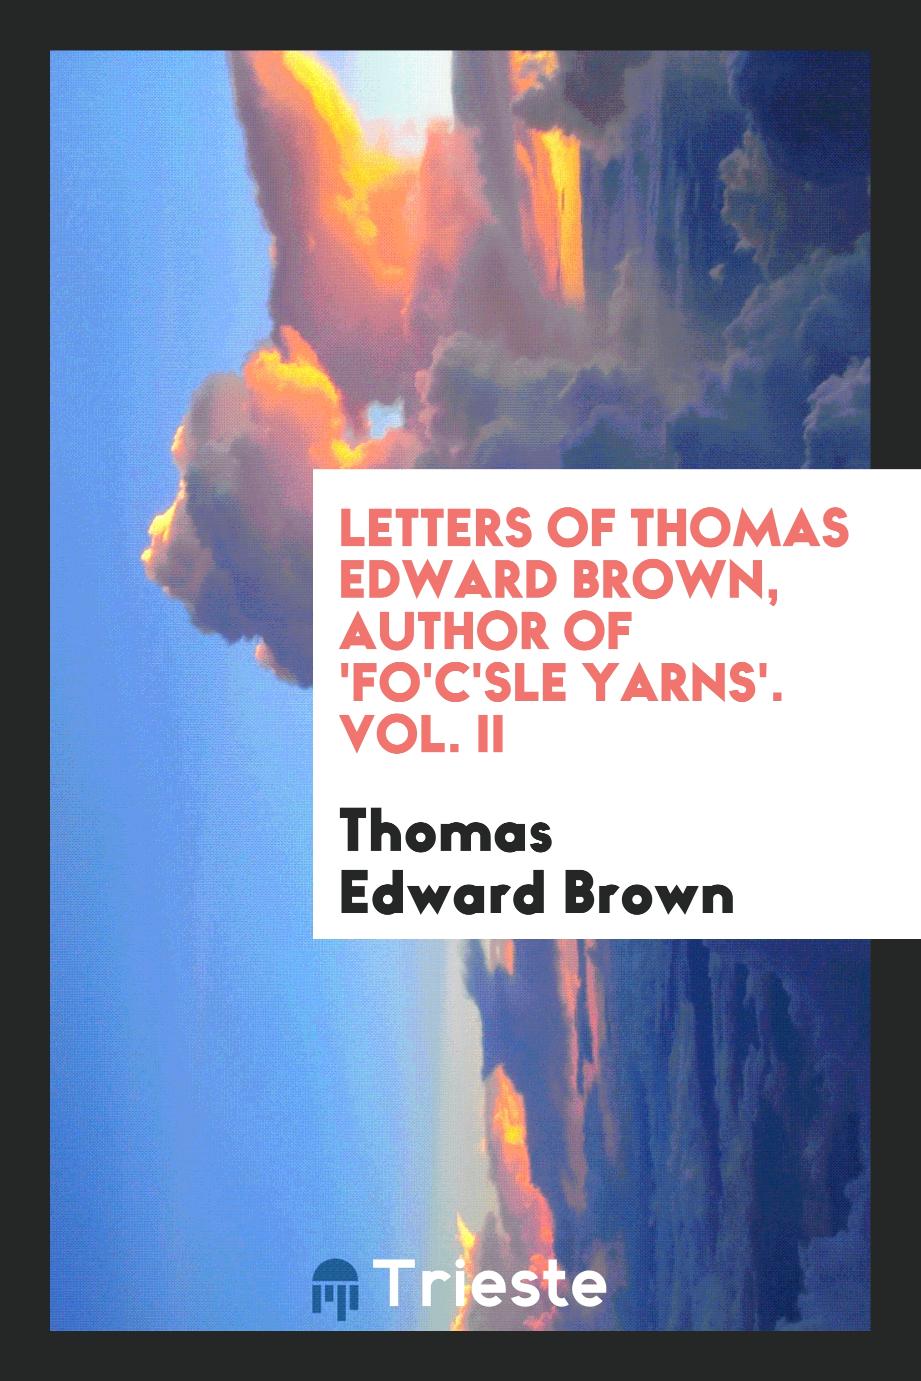 Letters of Thomas Edward Brown, author of 'Fo'c'sle yarns'. Vol. II